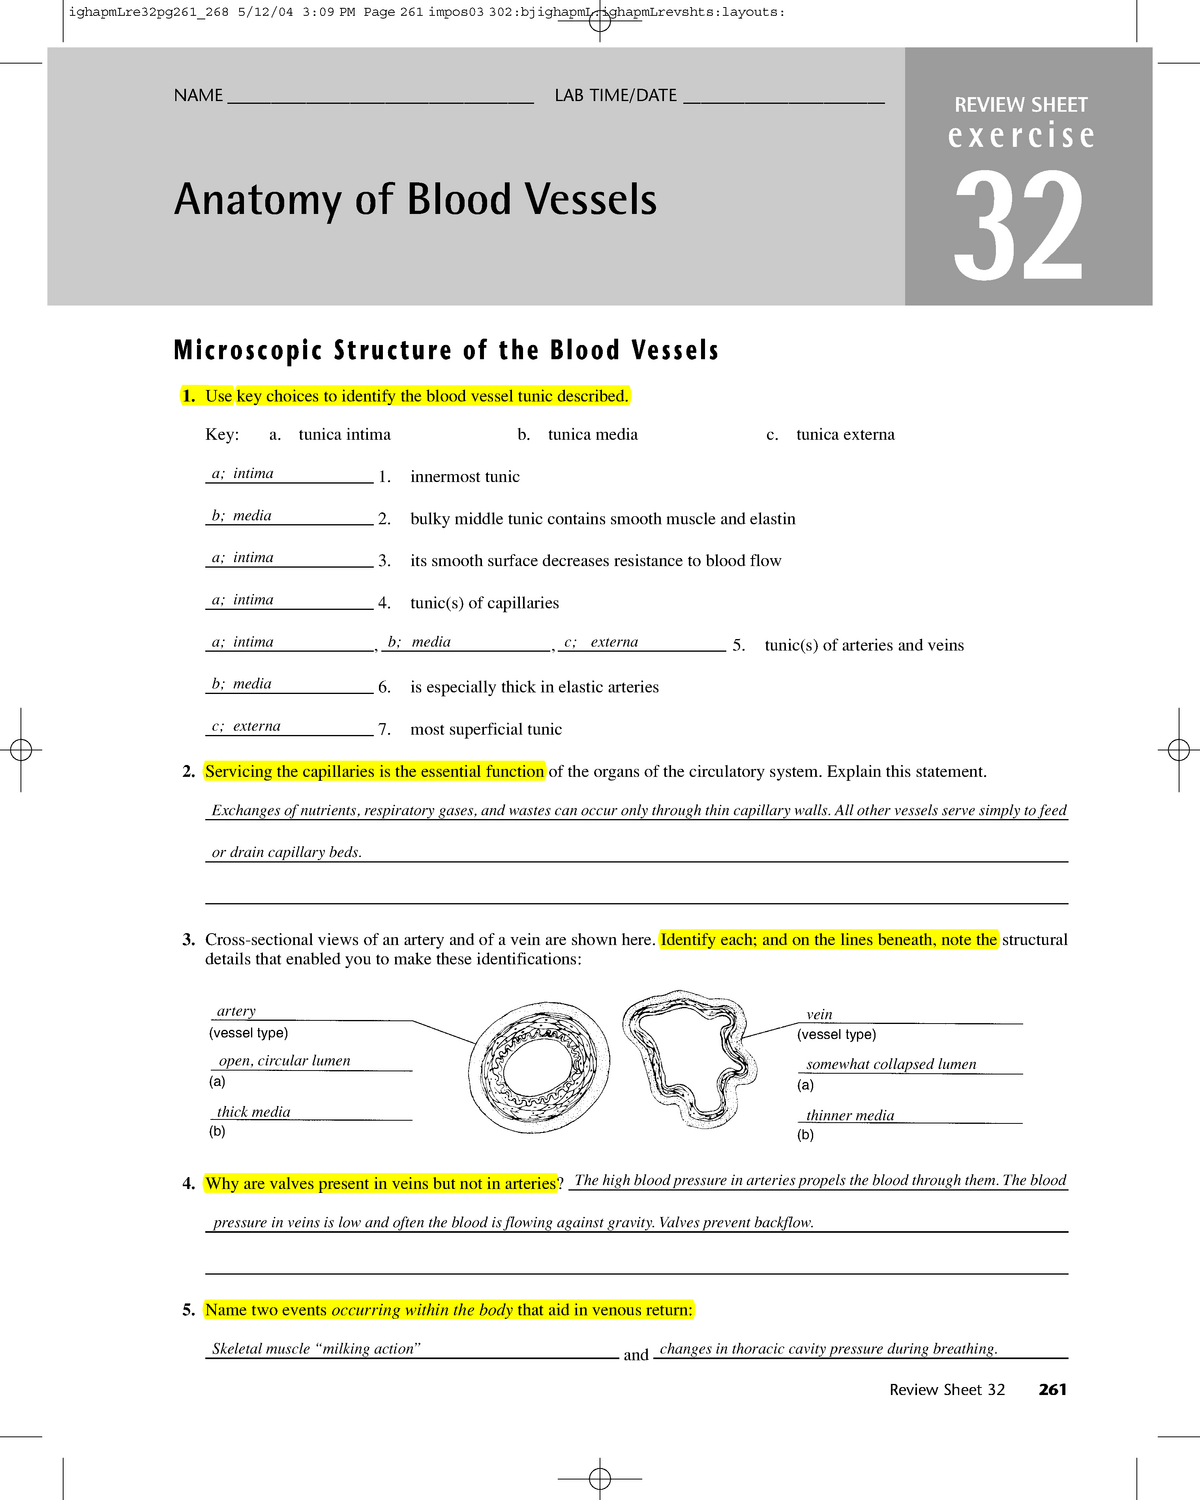 exercise 32 anatomy of blood vessels pdf